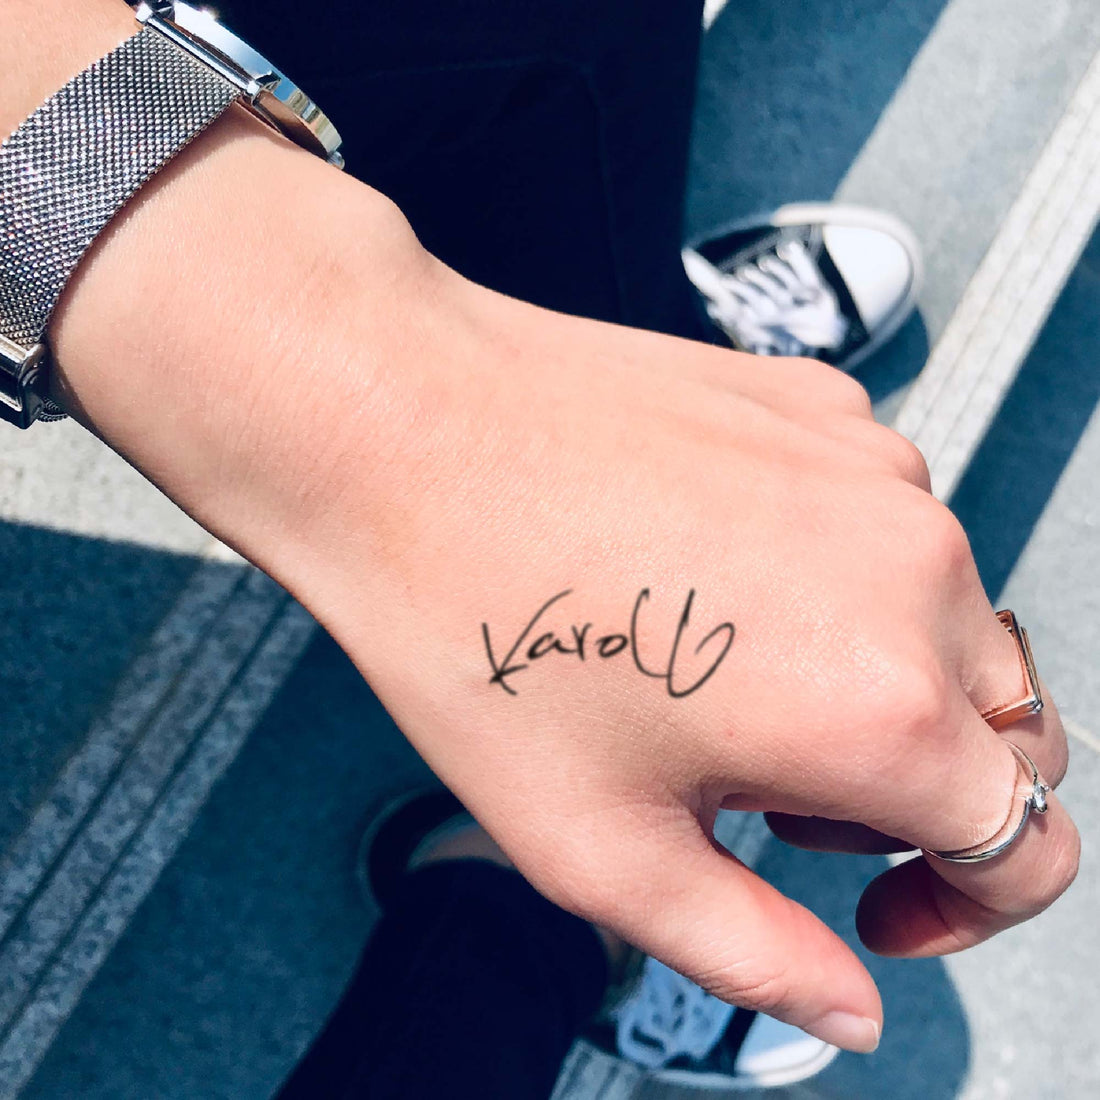 Karol G custom temporary tattoo sticker design idea inspiration meanings removal arm wrist hand words font name signature calligraphy lyrics tour concert outfits merch accessory gift souvenir costumes wear dress up code